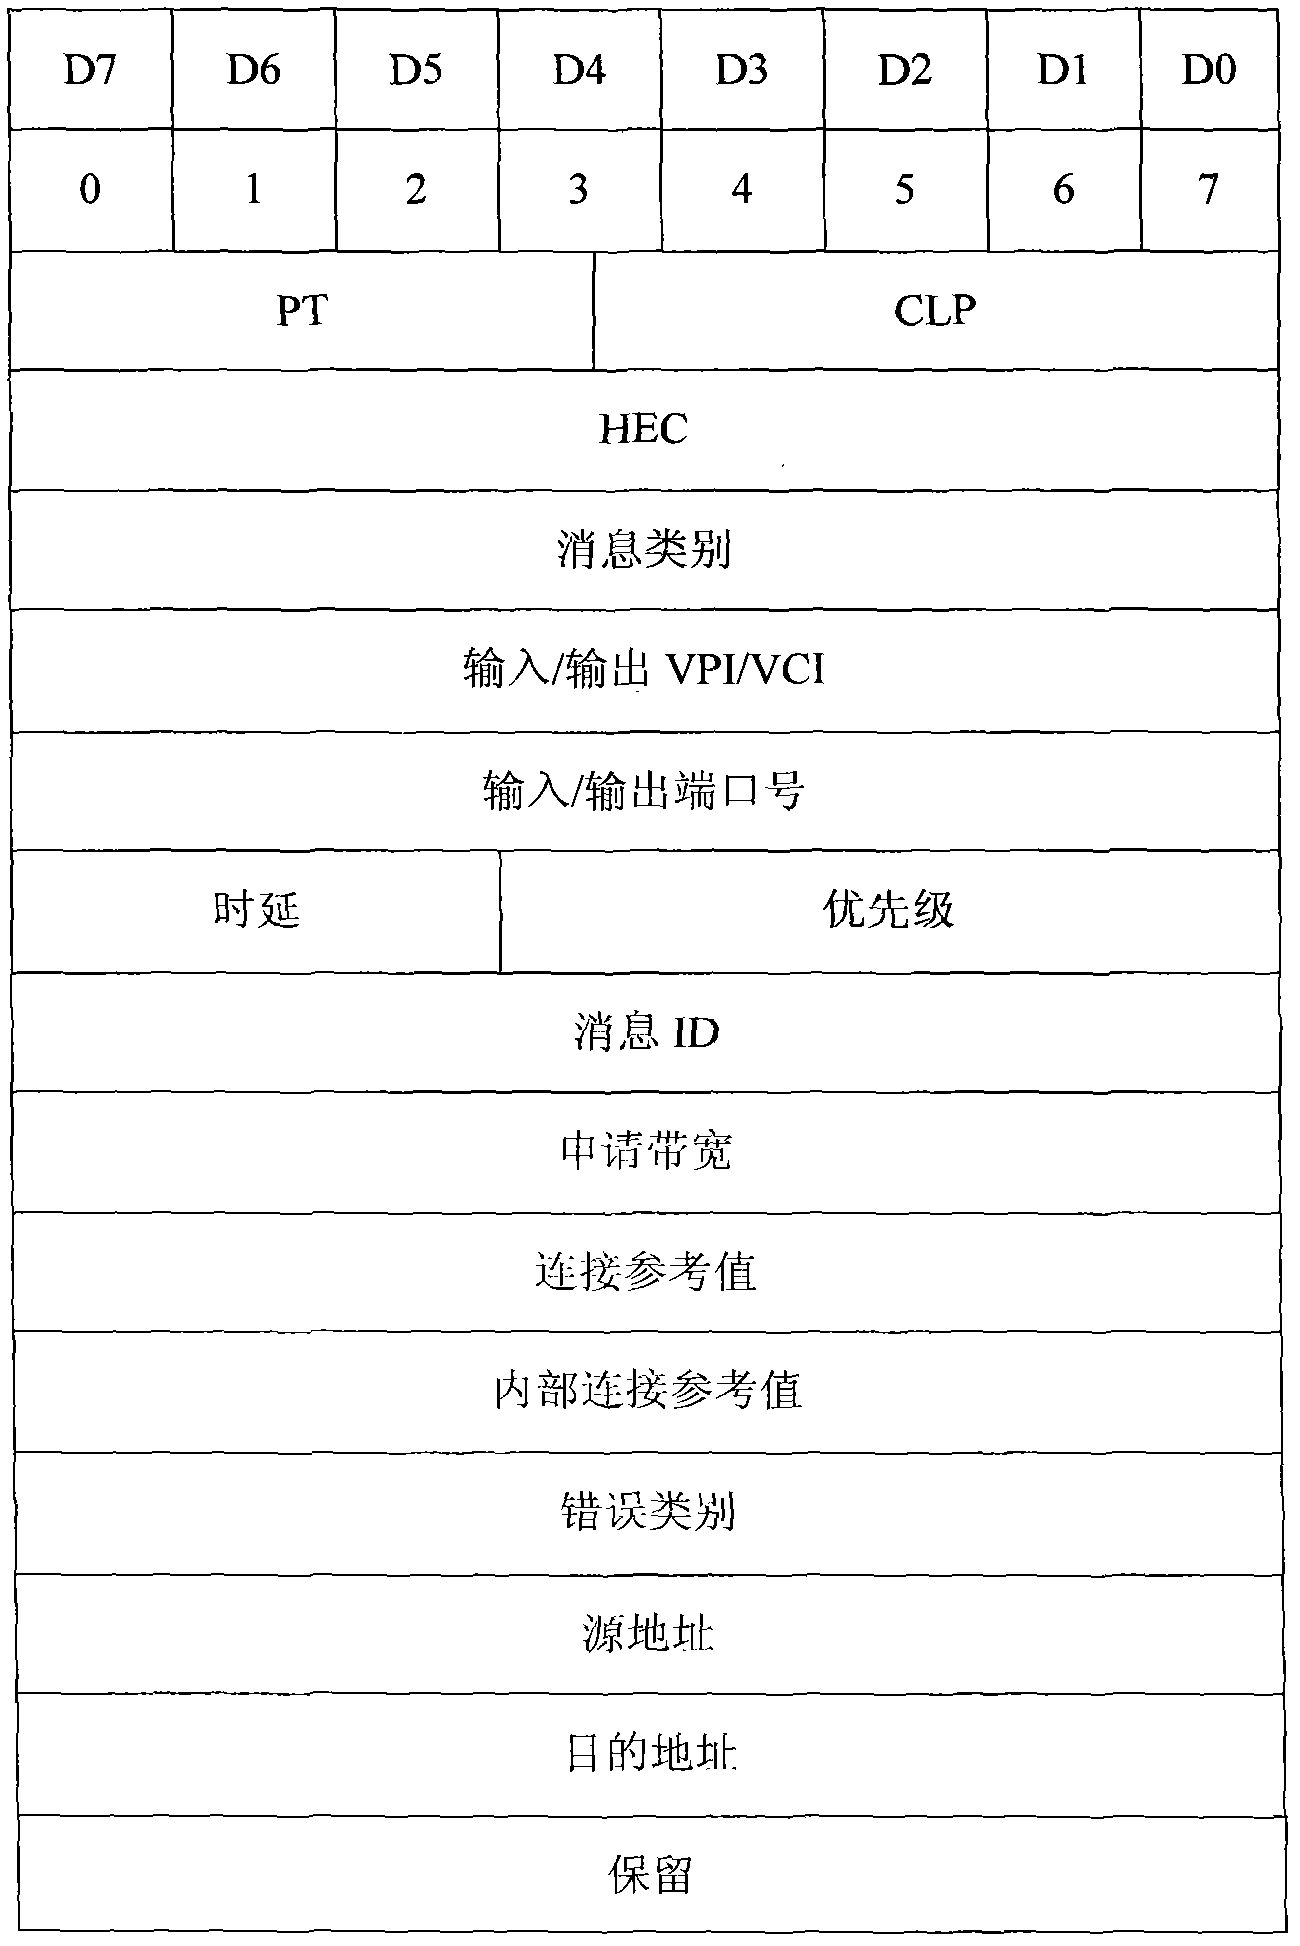 Signaling processing method and system for satellite communication network with satellite switch capability